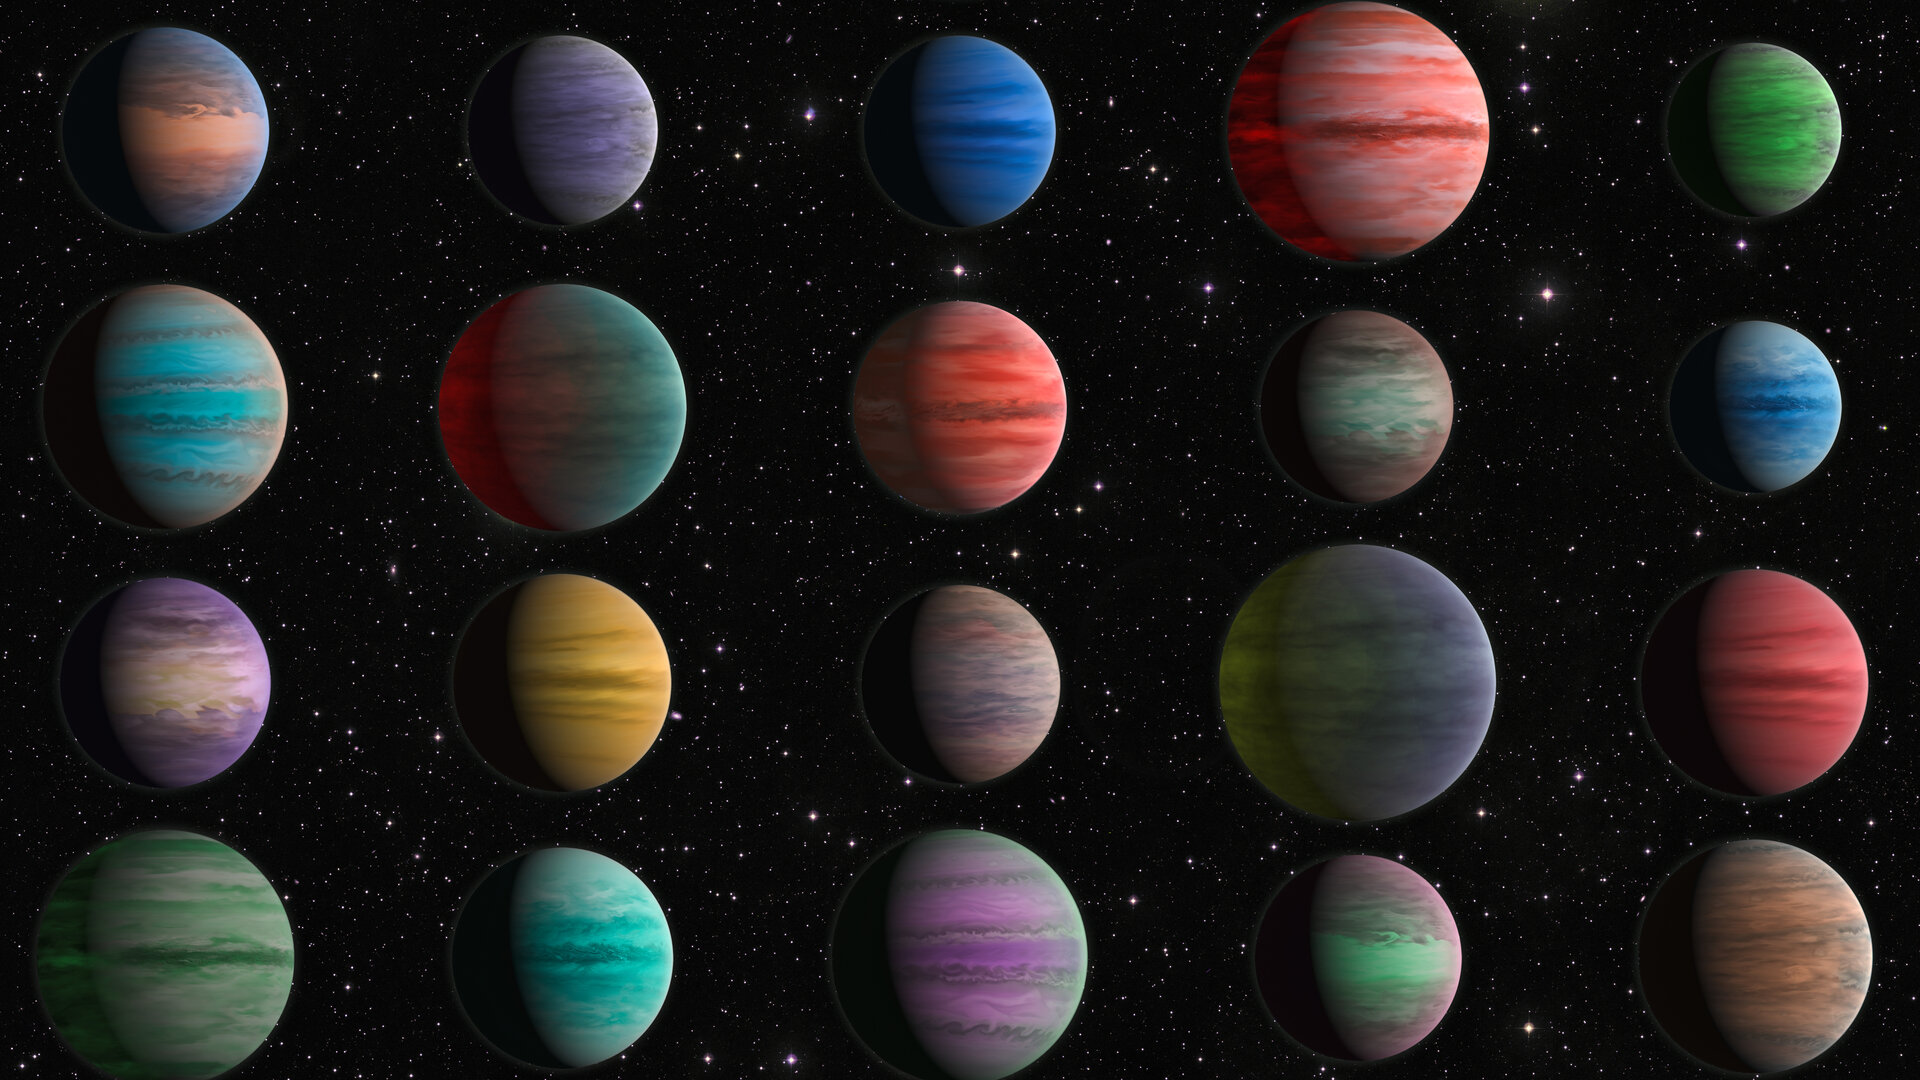 Artist impression of hot gaseous exoplanets